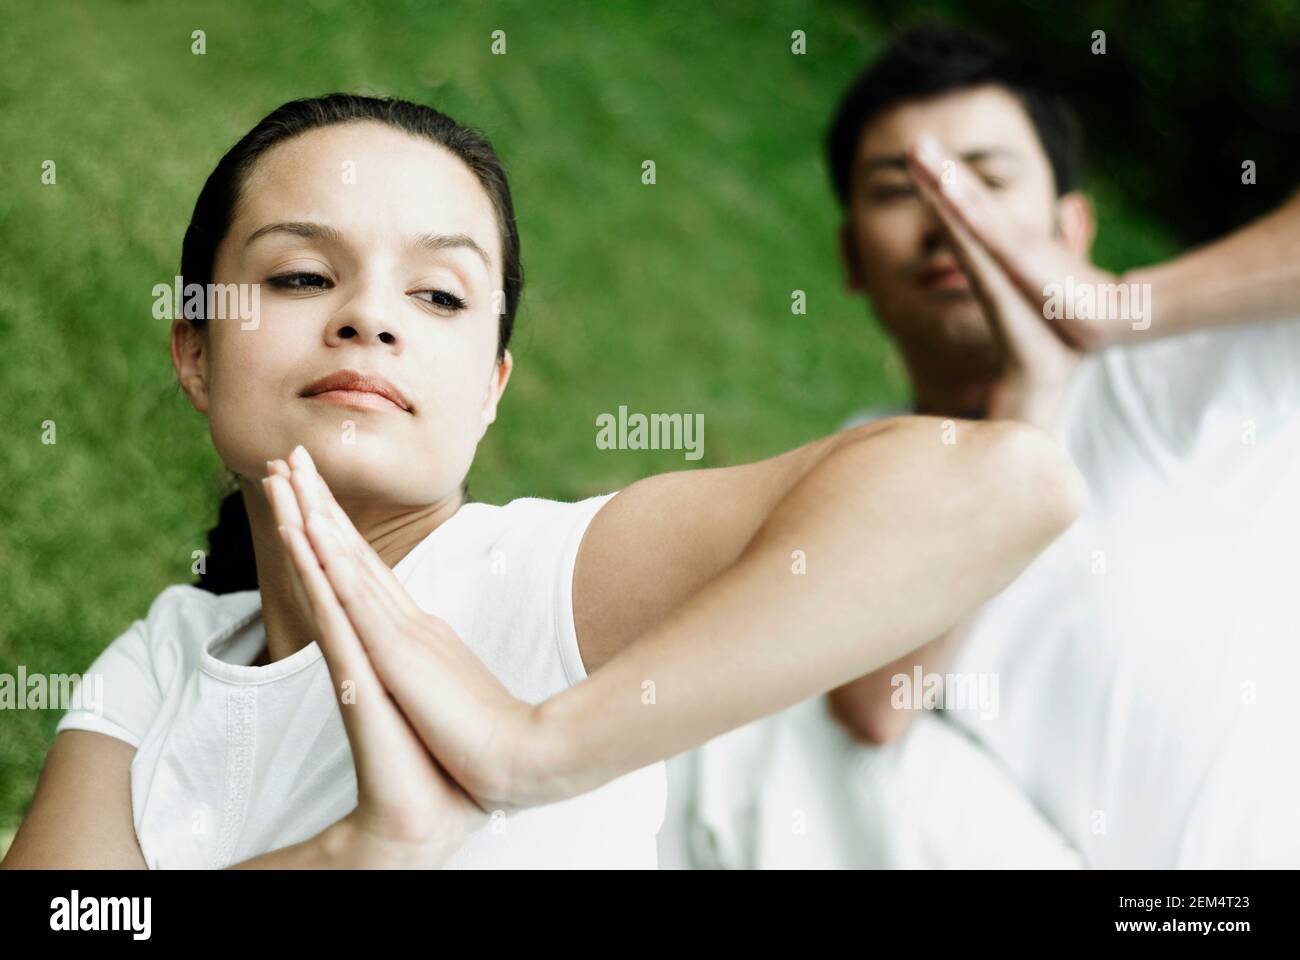 Close-up of a young woman and a young man in a prayer position Stock Photo